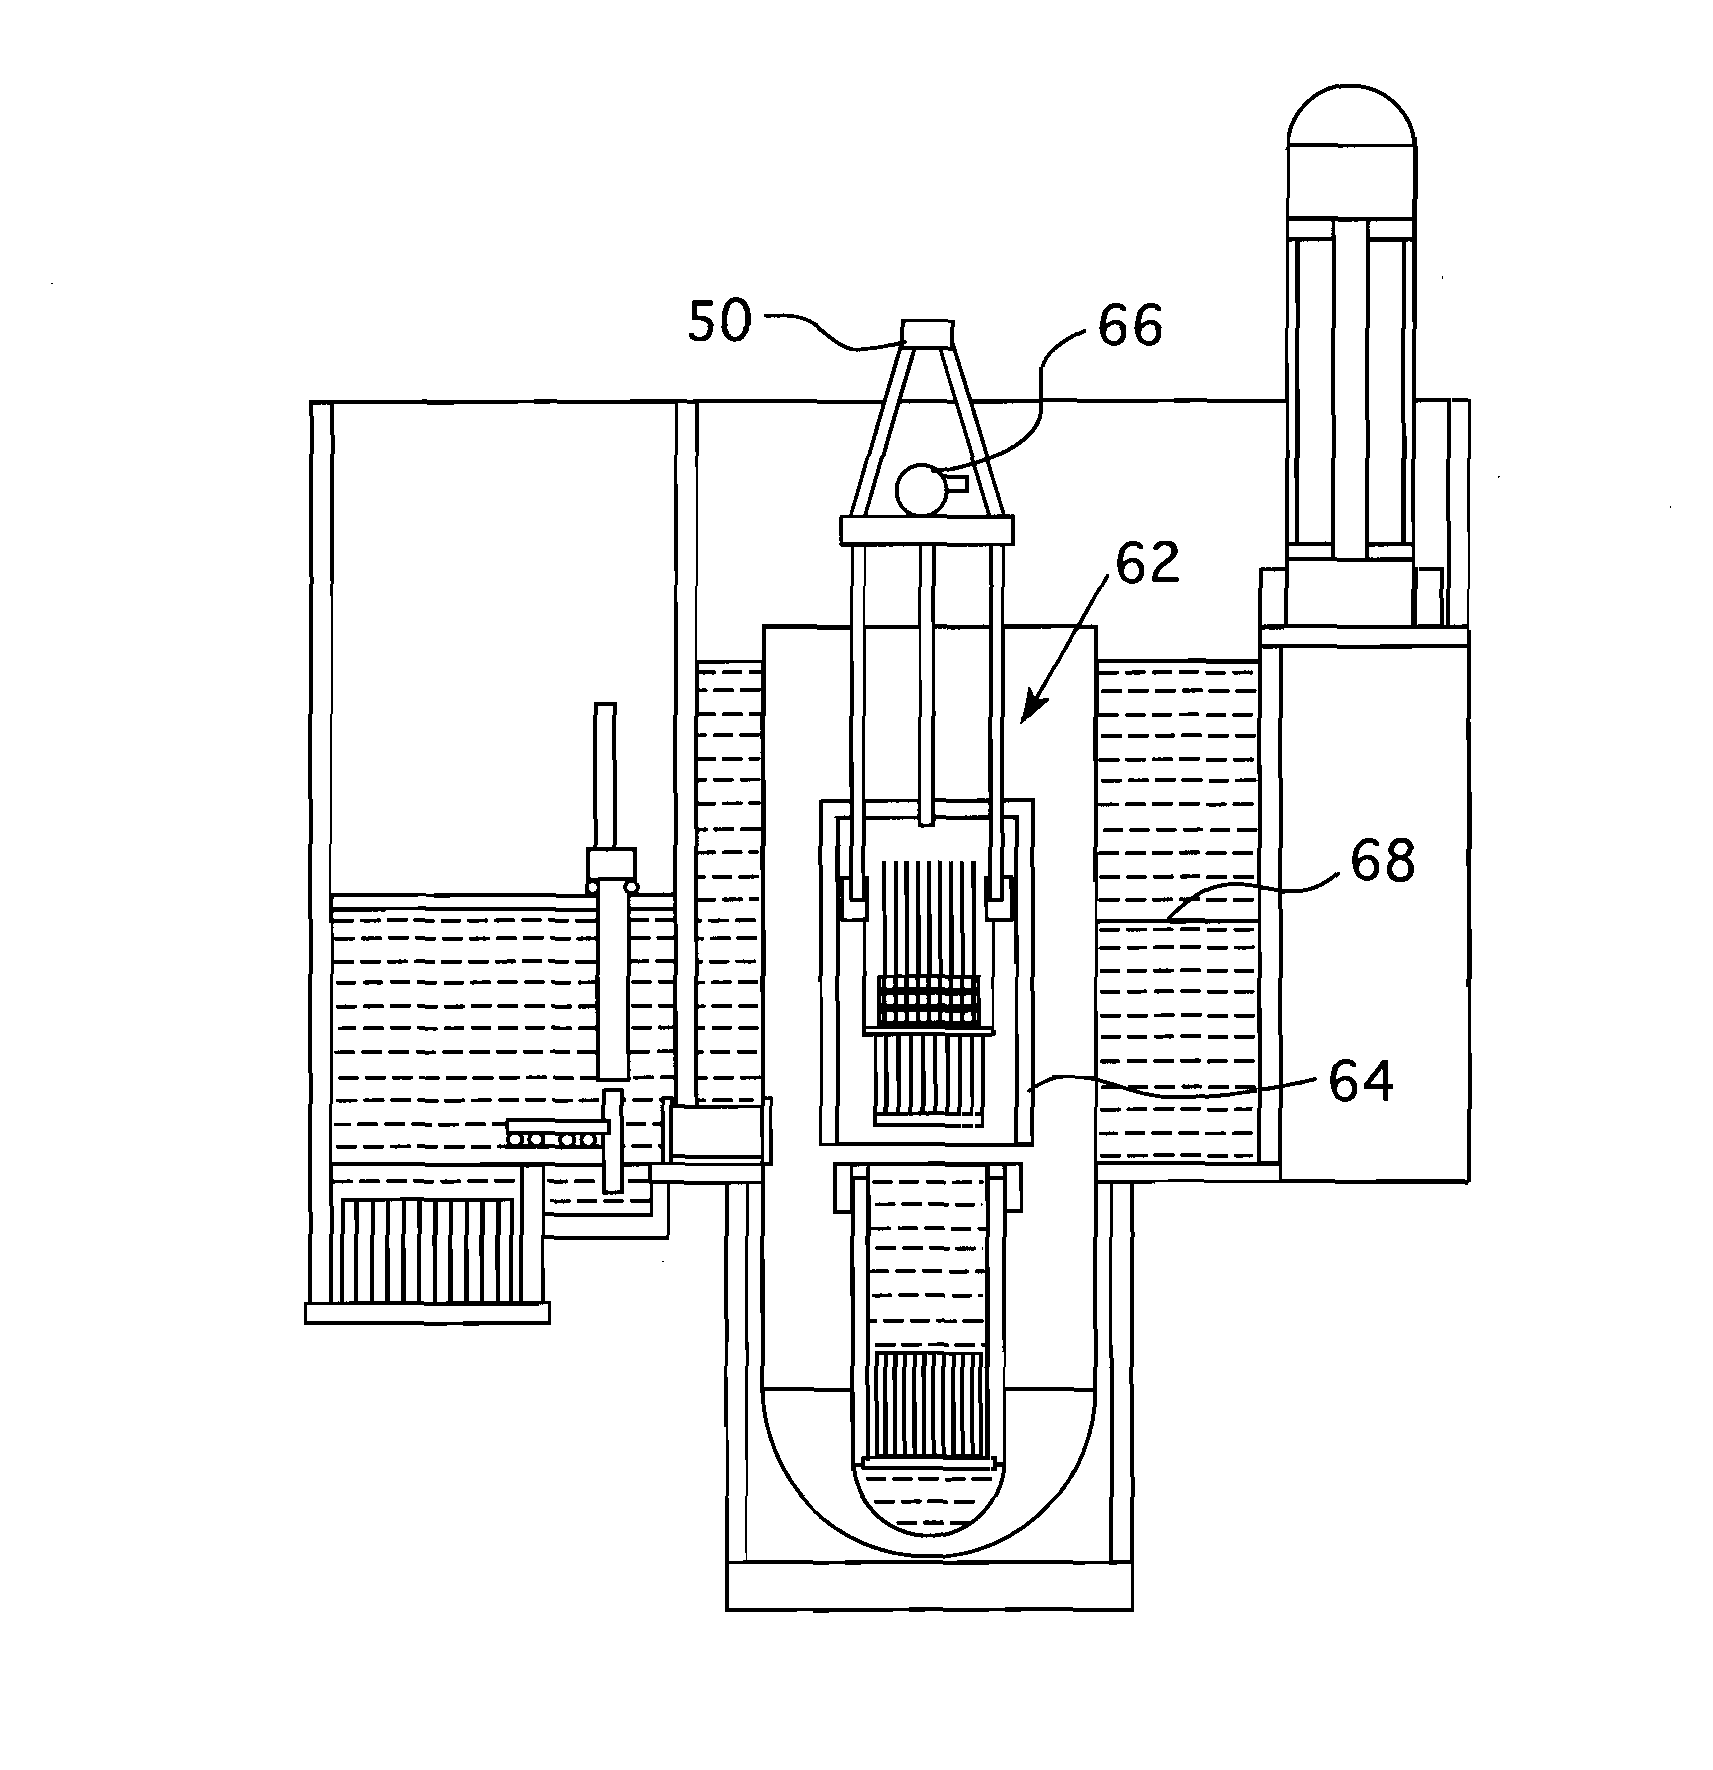 Method of refueling a nuclear reactor